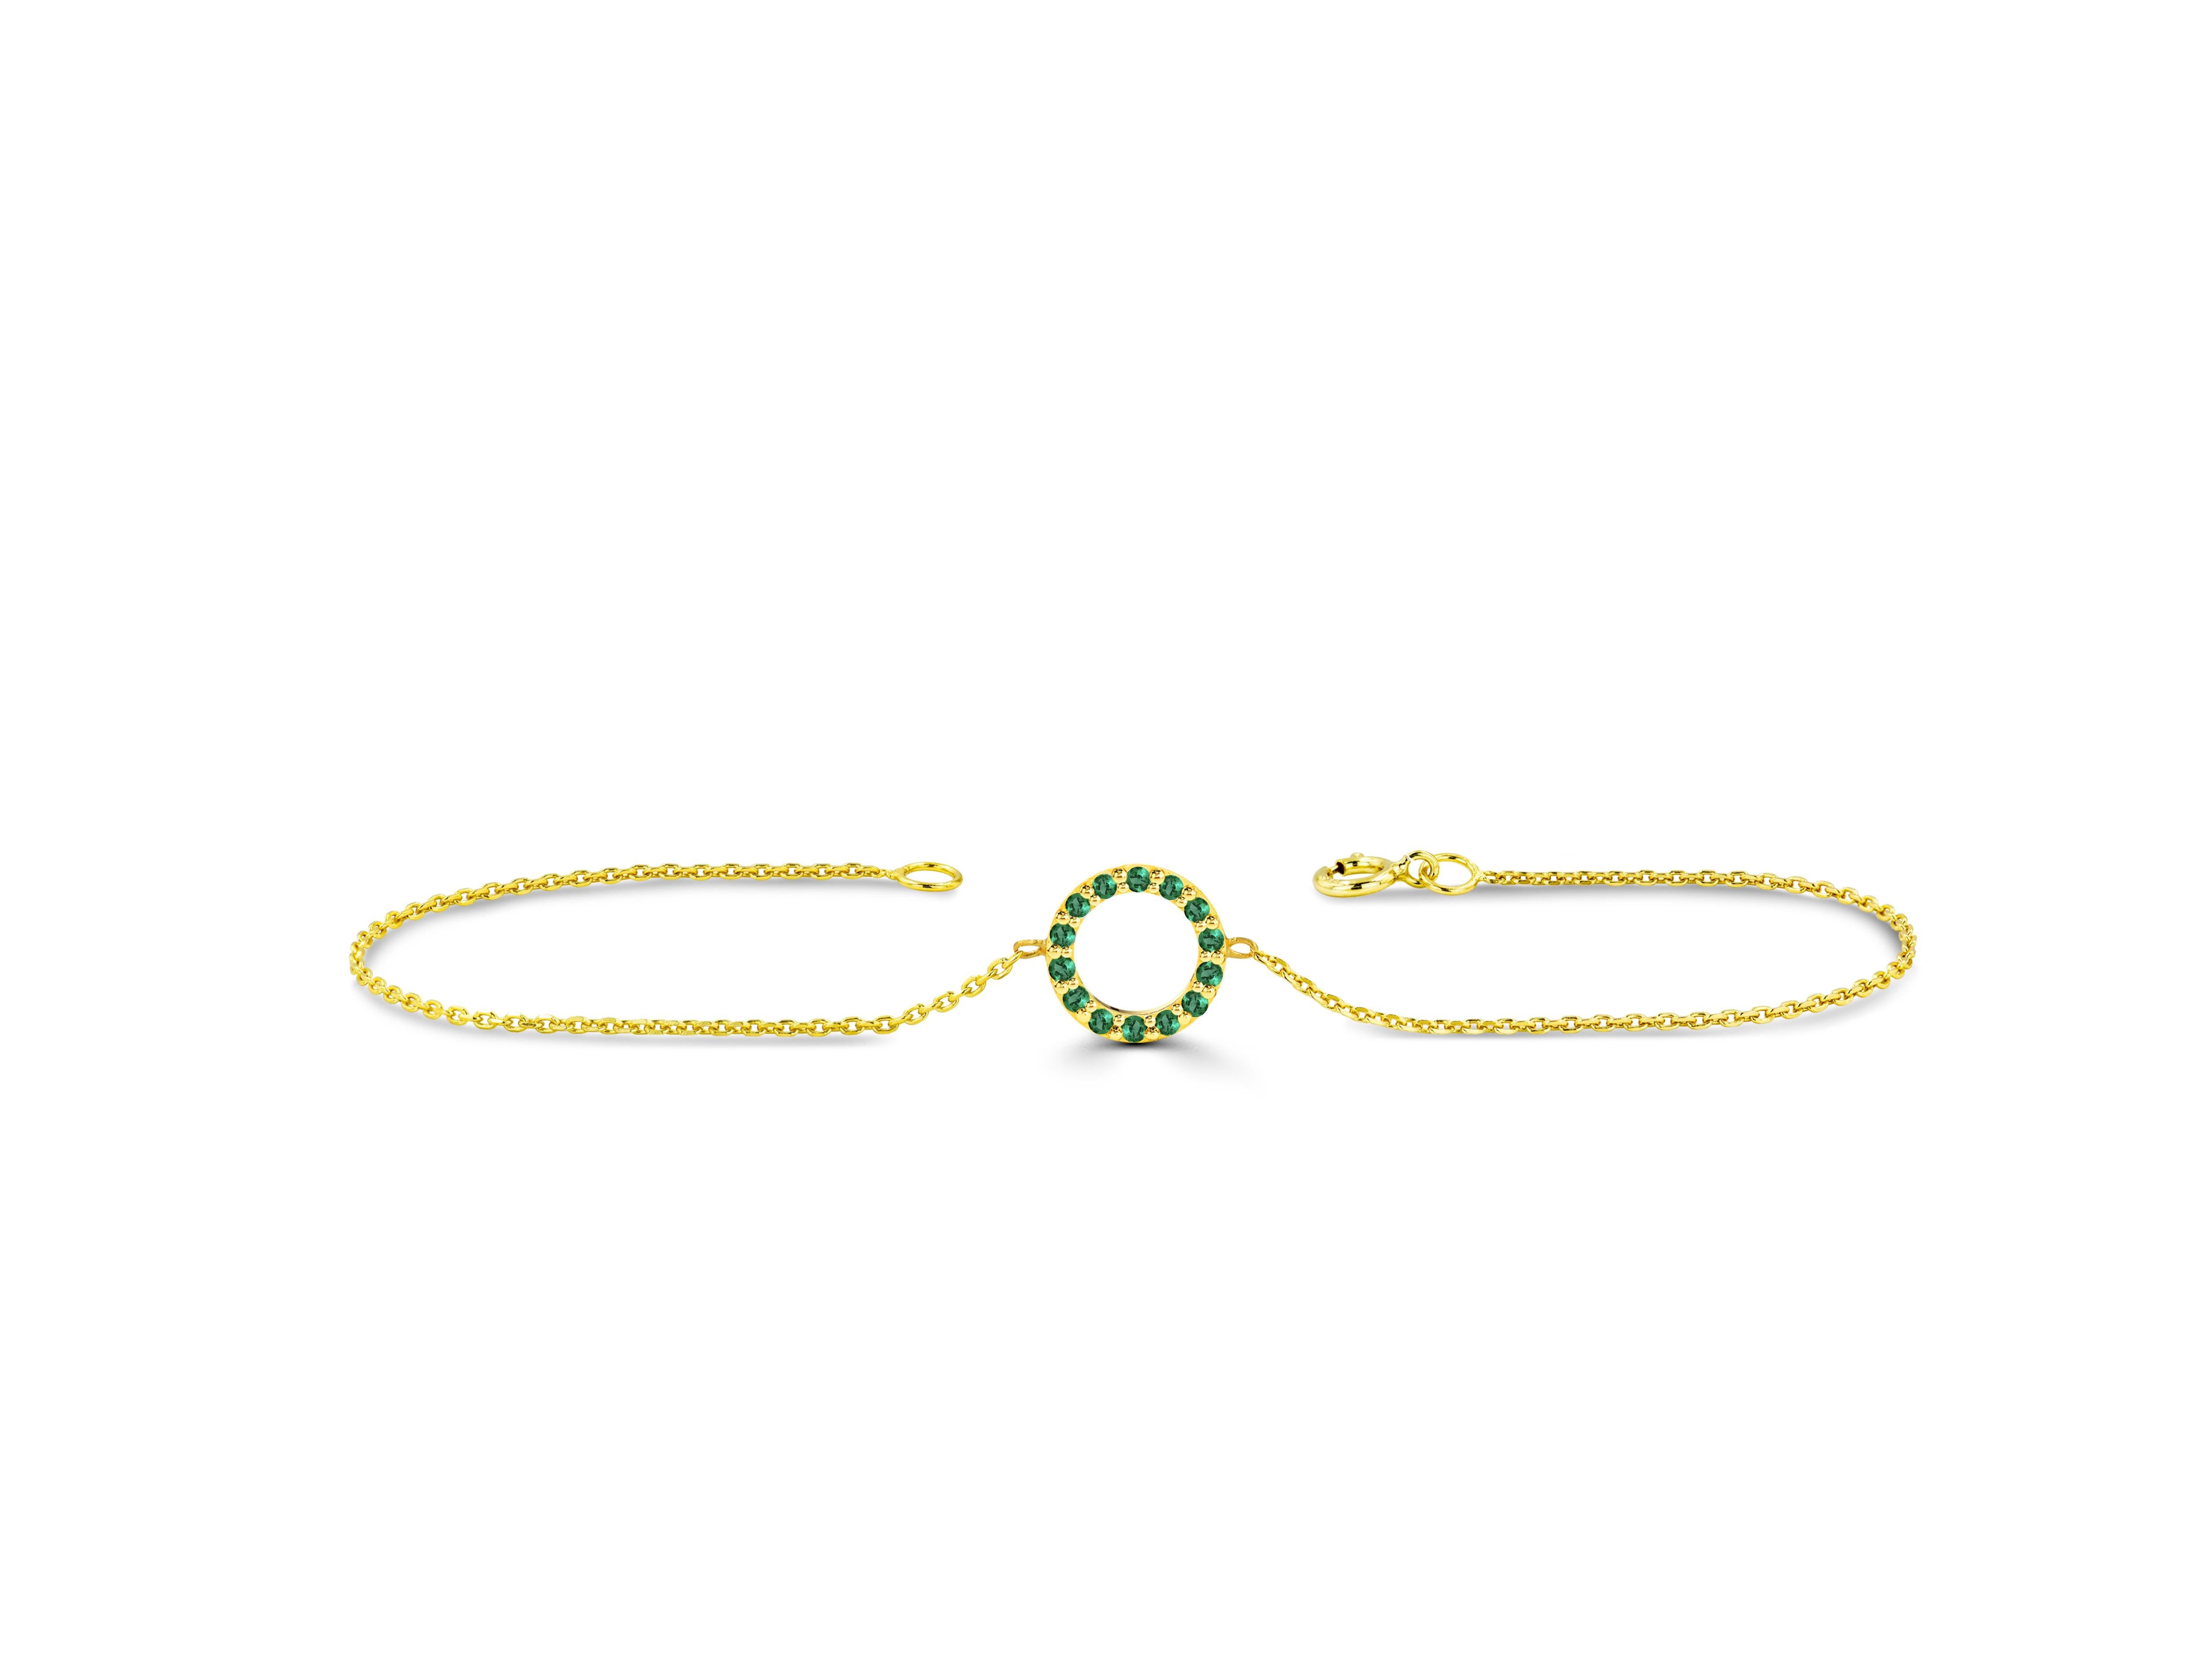 Delicate and Minimal Gemstone open Circle Bracelet is our best seller made of 14k  solid gold available in Rose gold, yellow gold, and white gold. With natural genuine round-cut Gemstones, each gemstone is hand selected by me to ensure quality and